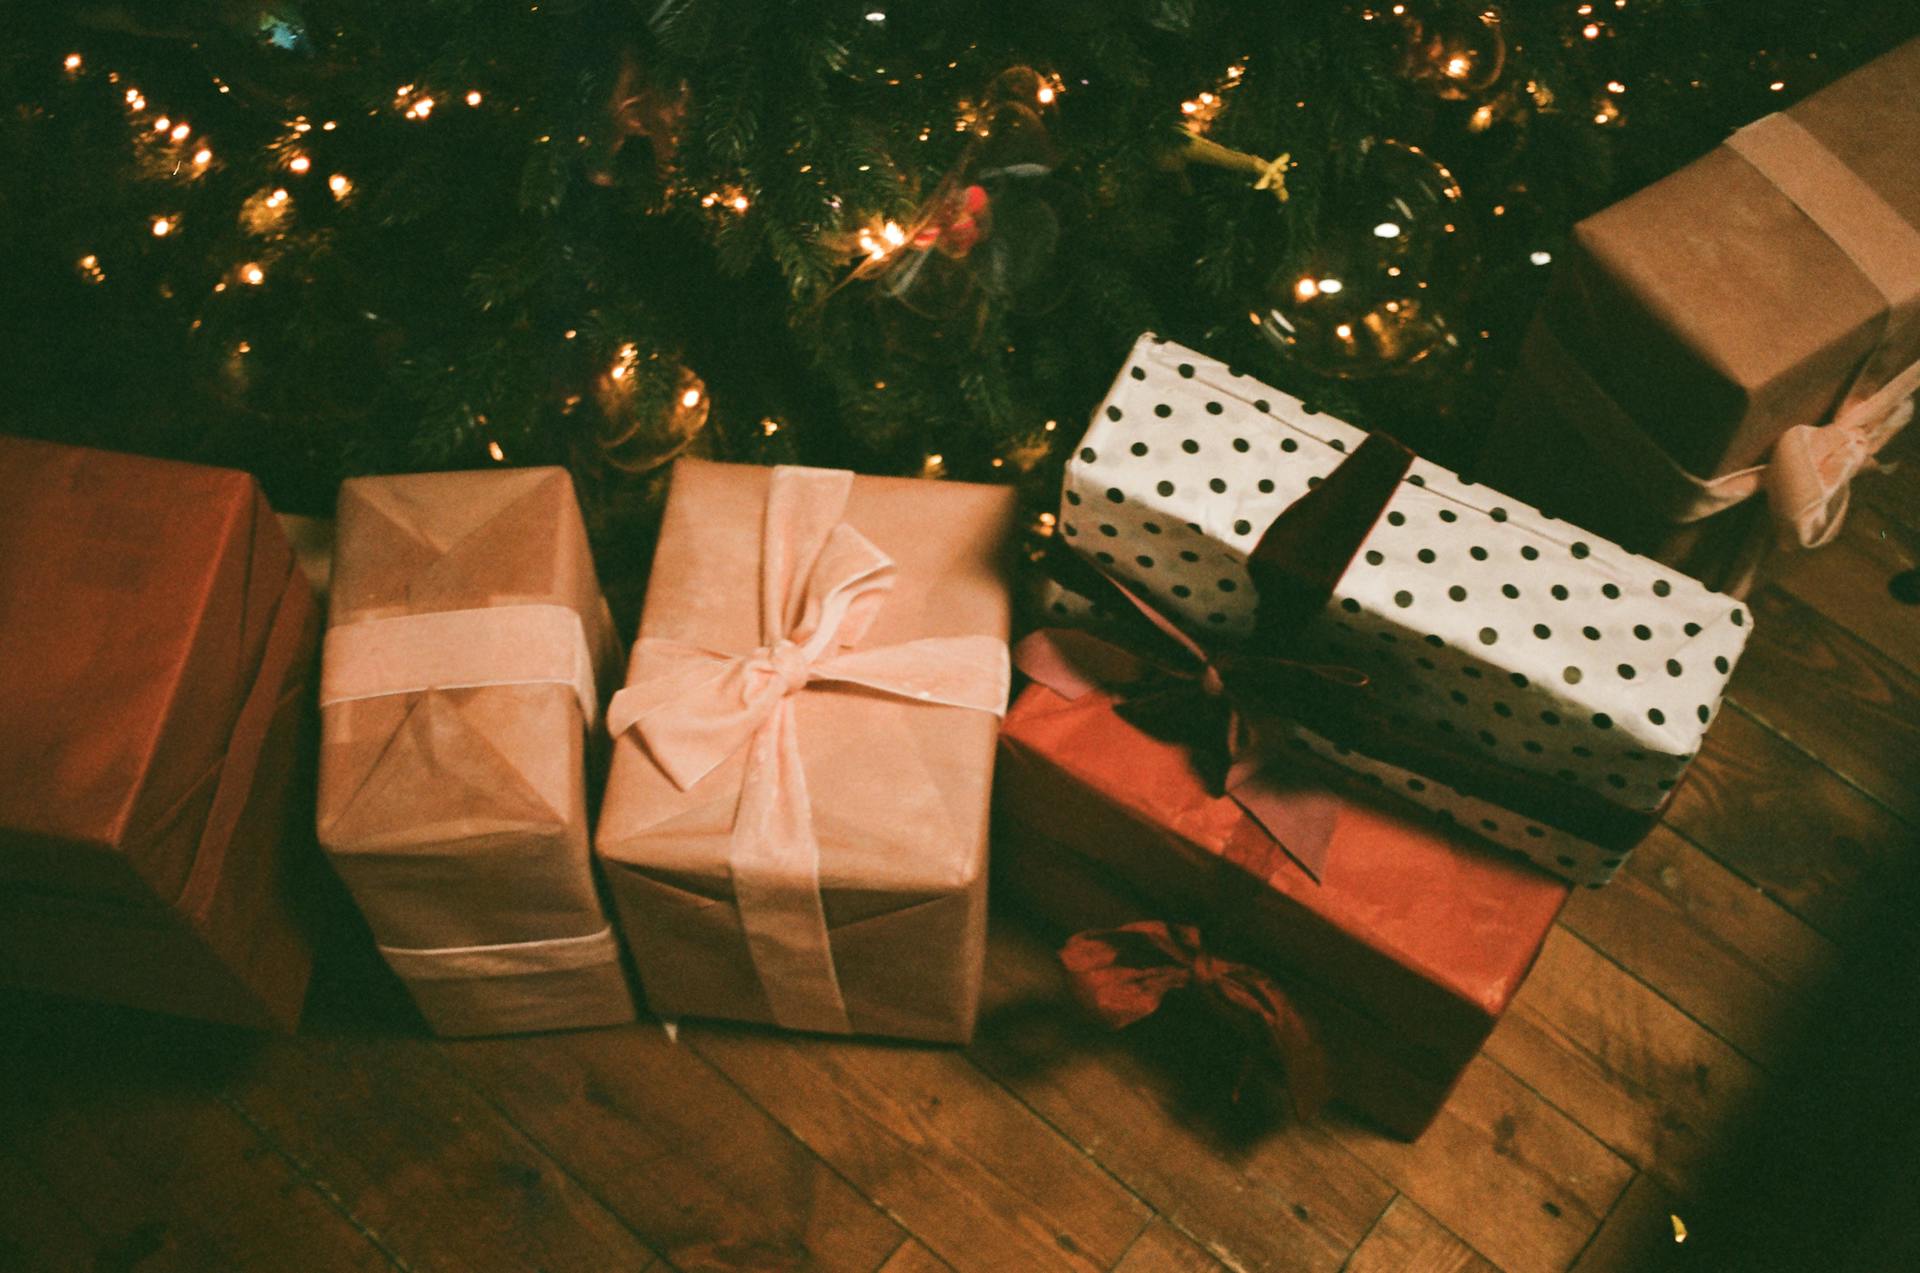 Assorted gift boxes on the floor near a Christmas tree | Source: Pexels